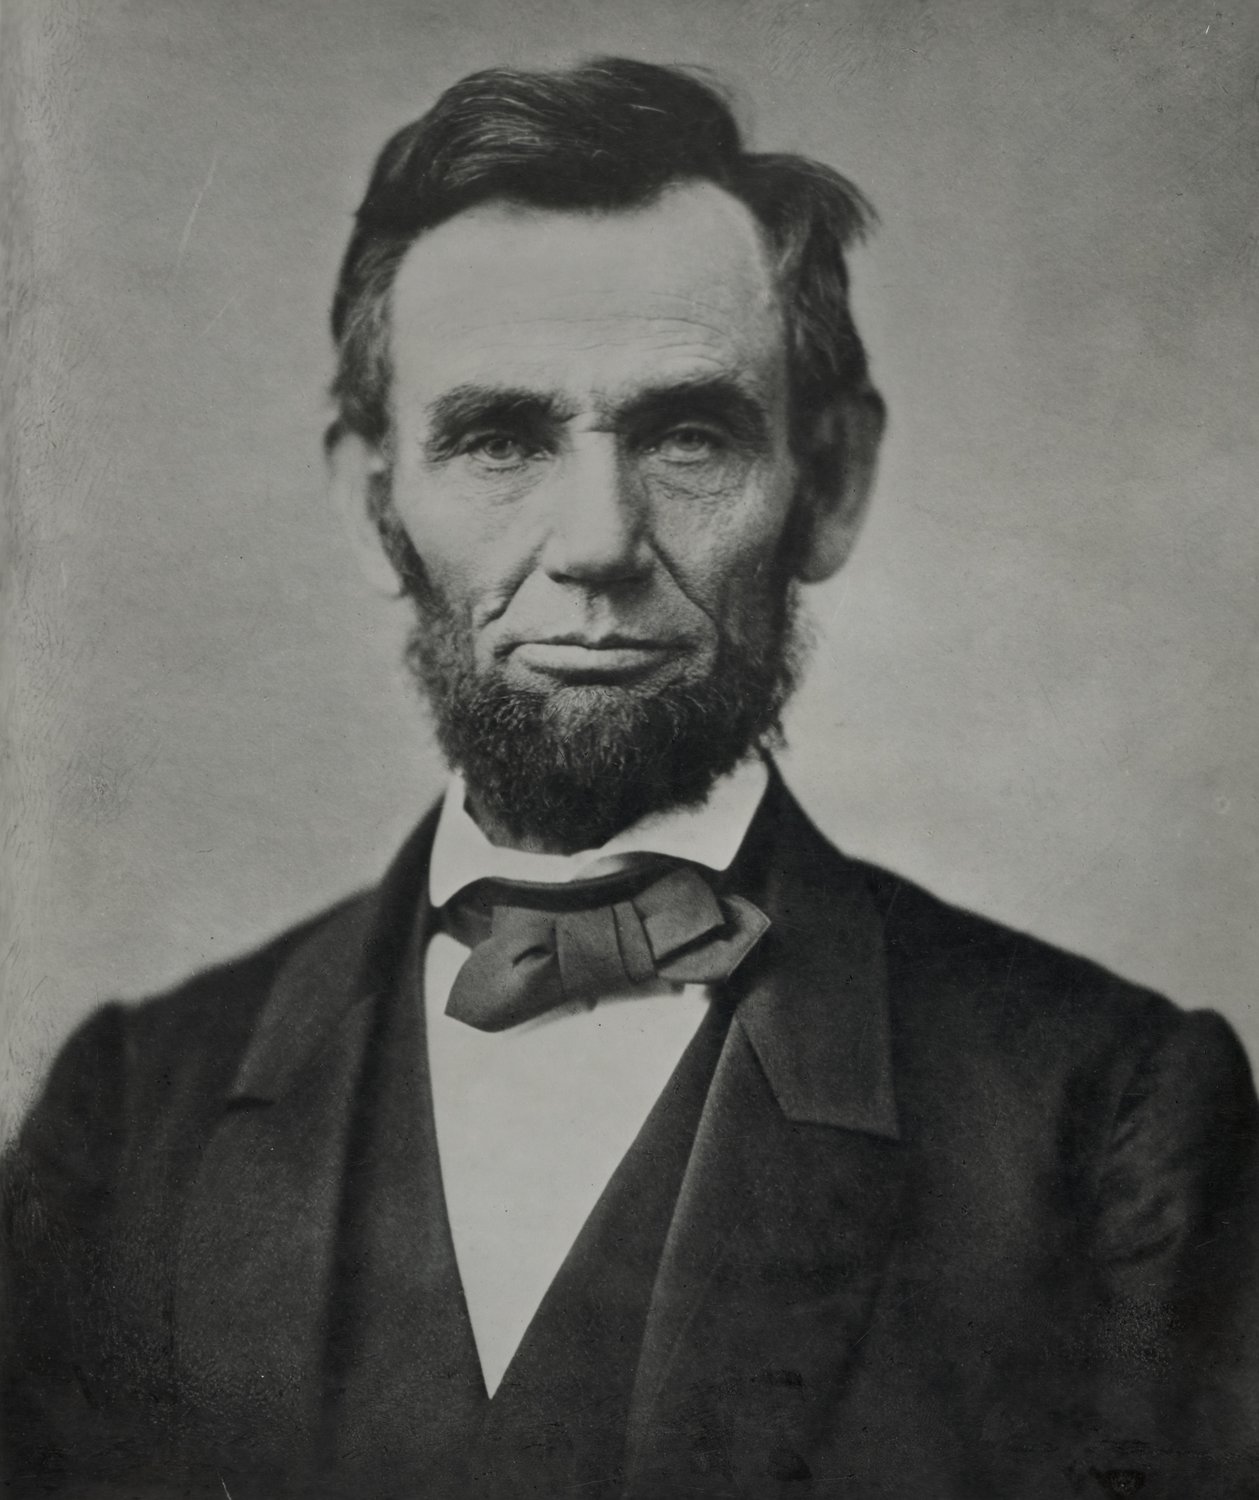 Now we think of Lincoln as beloved, at least in the North. But it wasn’t true. “He was hated,” said Sullivan County Historian John Conway.  “We can’t really grasp how much he was hated.”